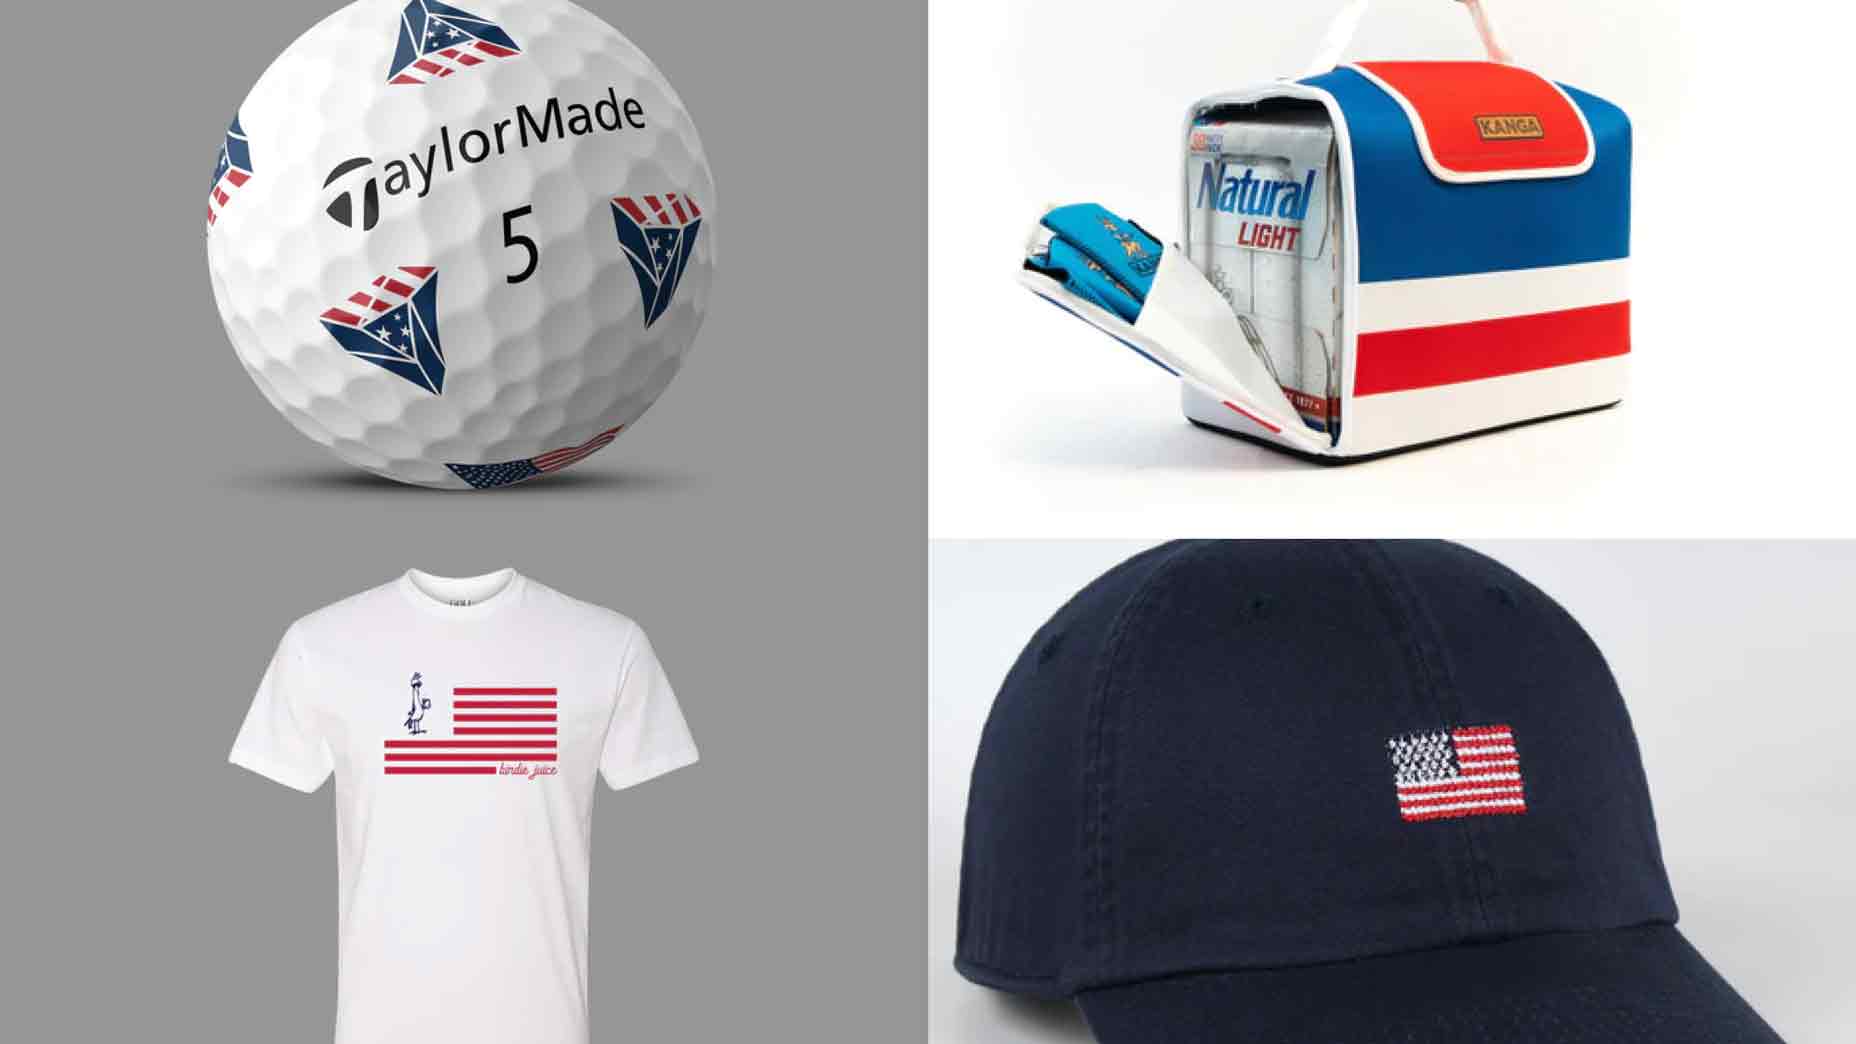 To support the USA this Memorial Day, take advantage of these red, white, and blue themed golf items from Fairway Jockey